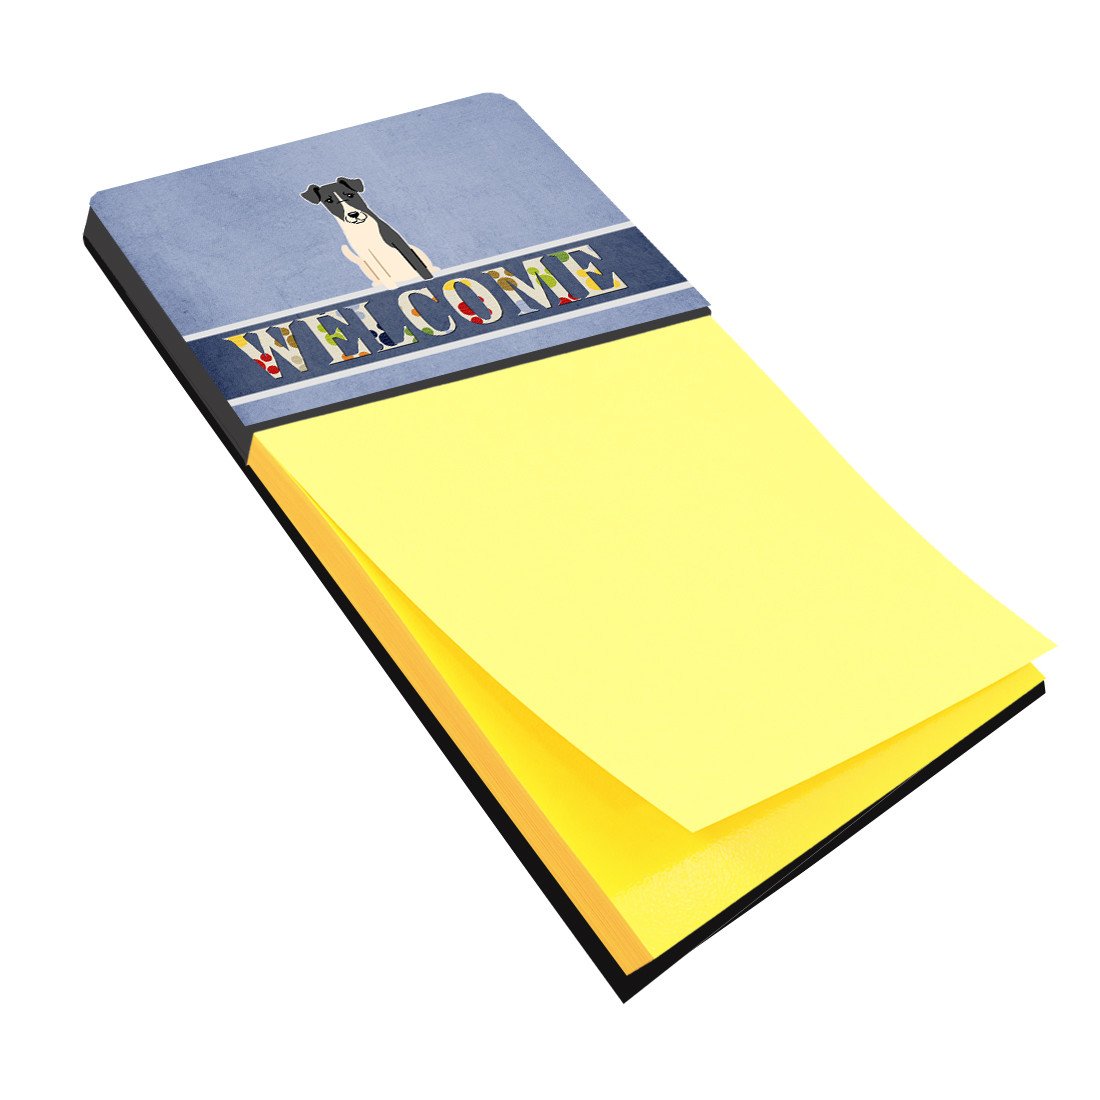 Smooth Fox Terrier Welcome Sticky Note Holder BB5679SN by Caroline's Treasures